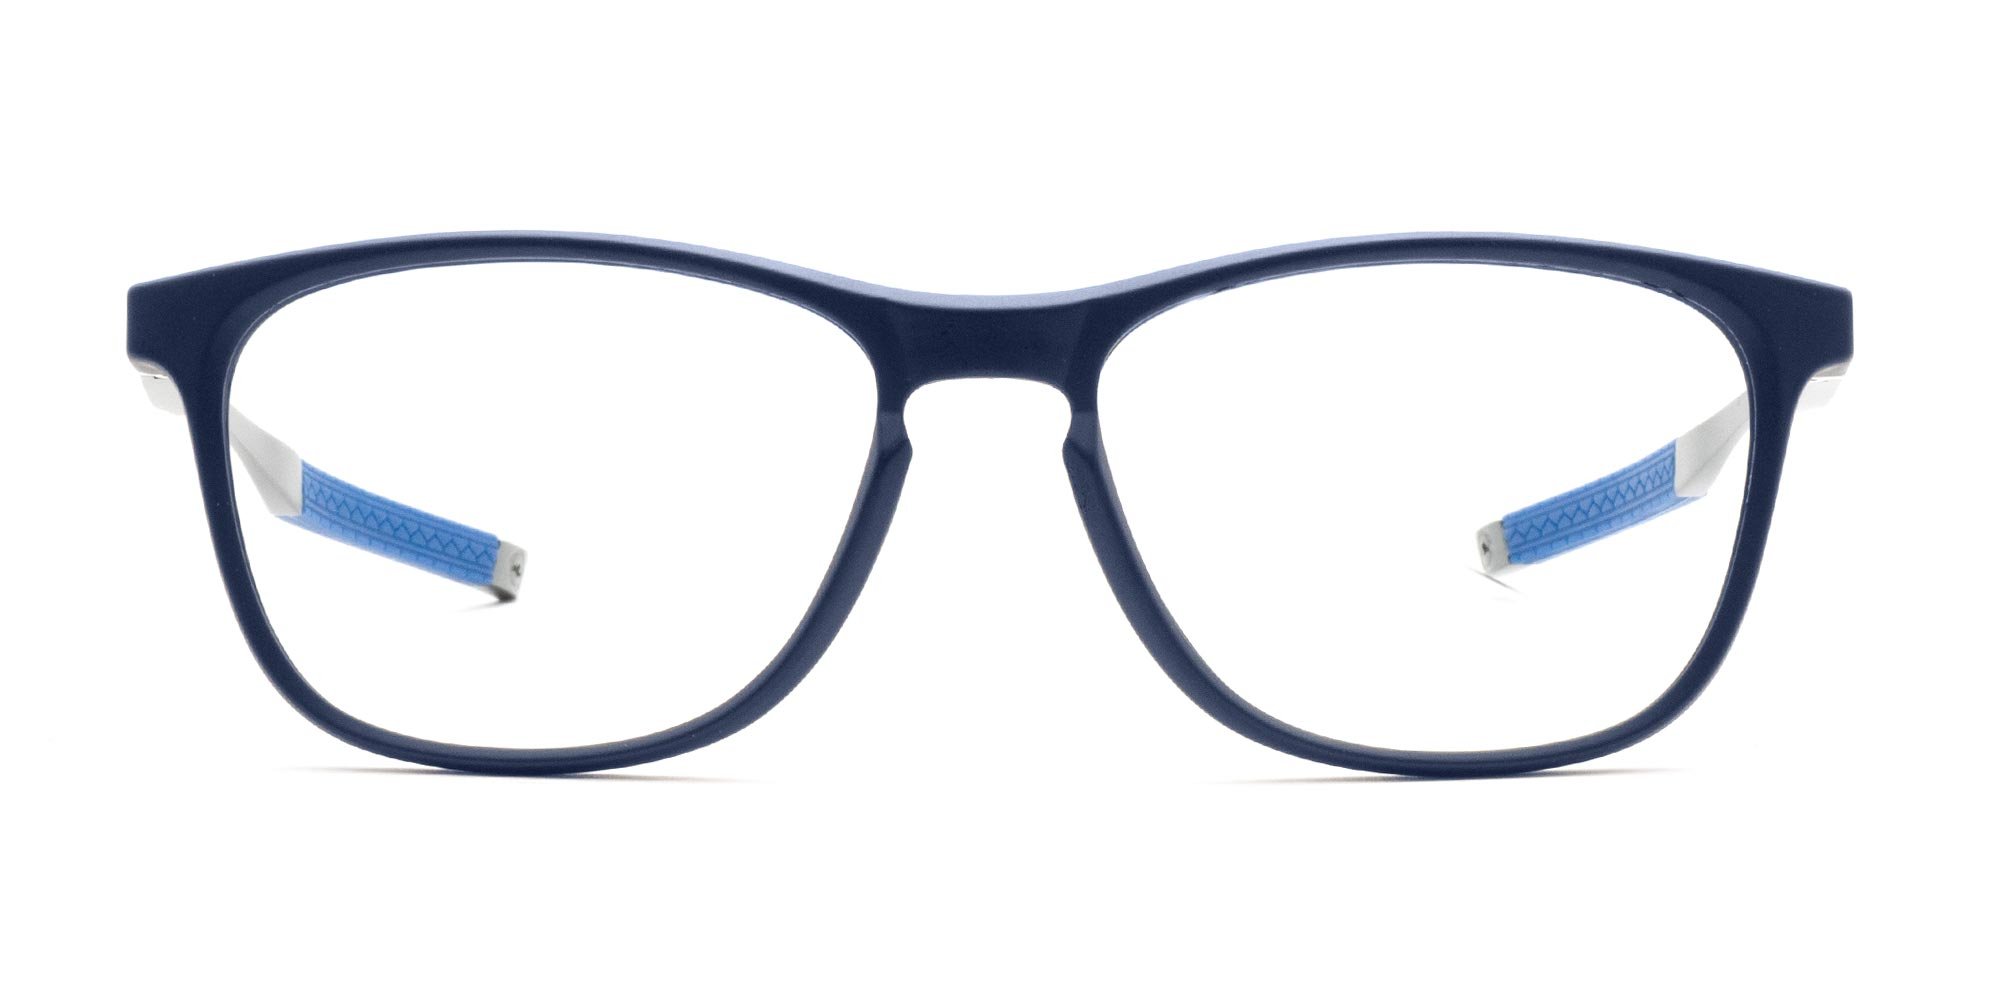 HAALAND 7 - Blue Cycling Glasses | Specscart.®